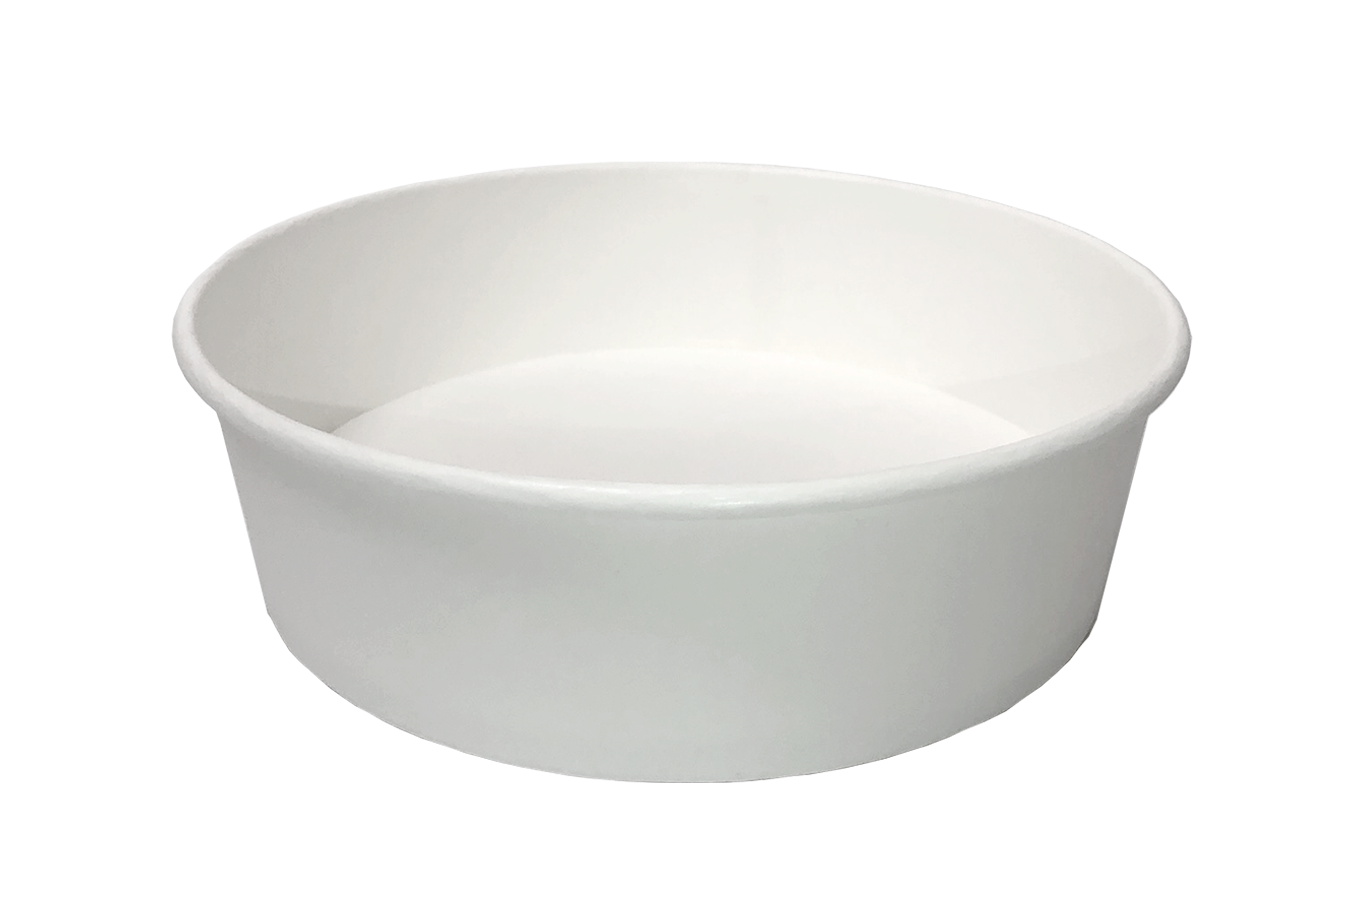 Premium takeout container white color 48 oz size Athena paper bowl by Ecoapx Inc